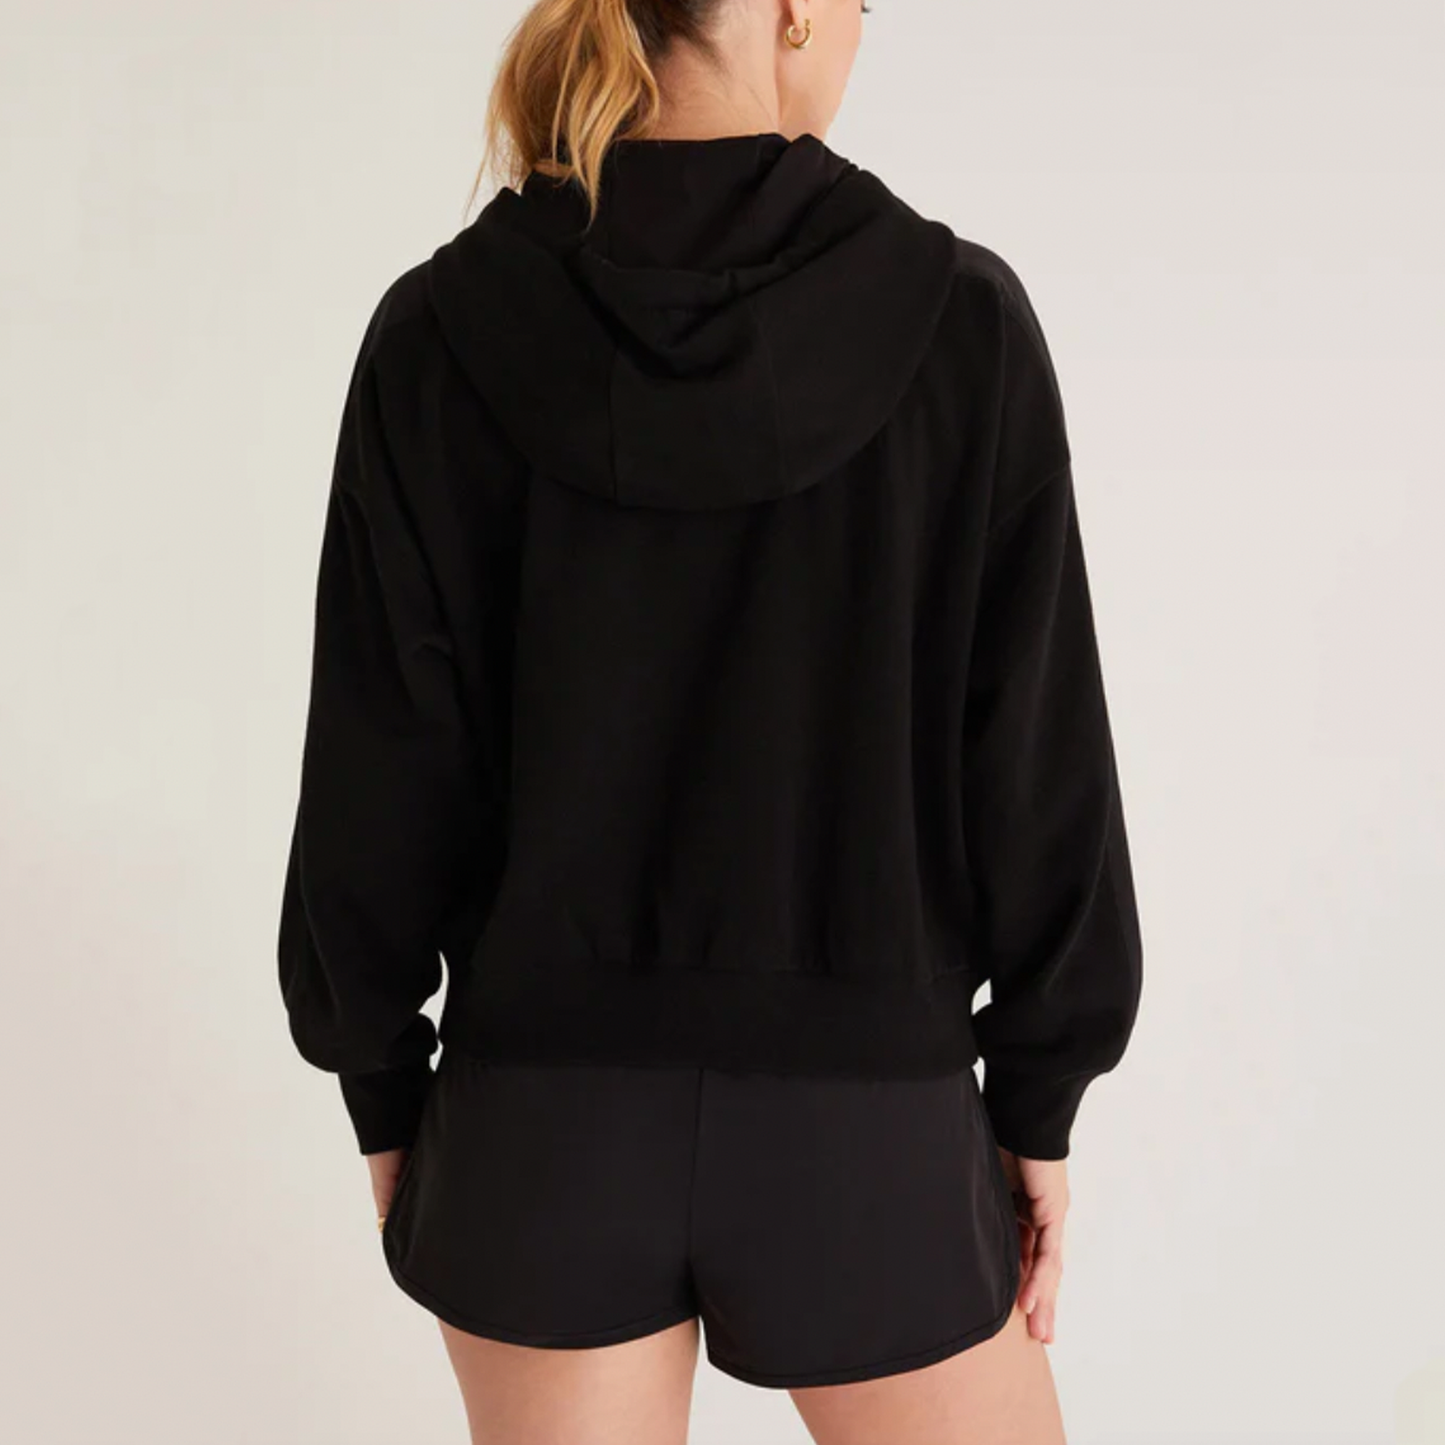 Z Supply Good Sport Nylon Hoodie. Zip up in the Good Sport Nylon Mix Hoodie. Made from our cozy Cotton Fleece fabric, this jacket features nylon mix panels for a sporty, cool look you'll wear in and out of the gym